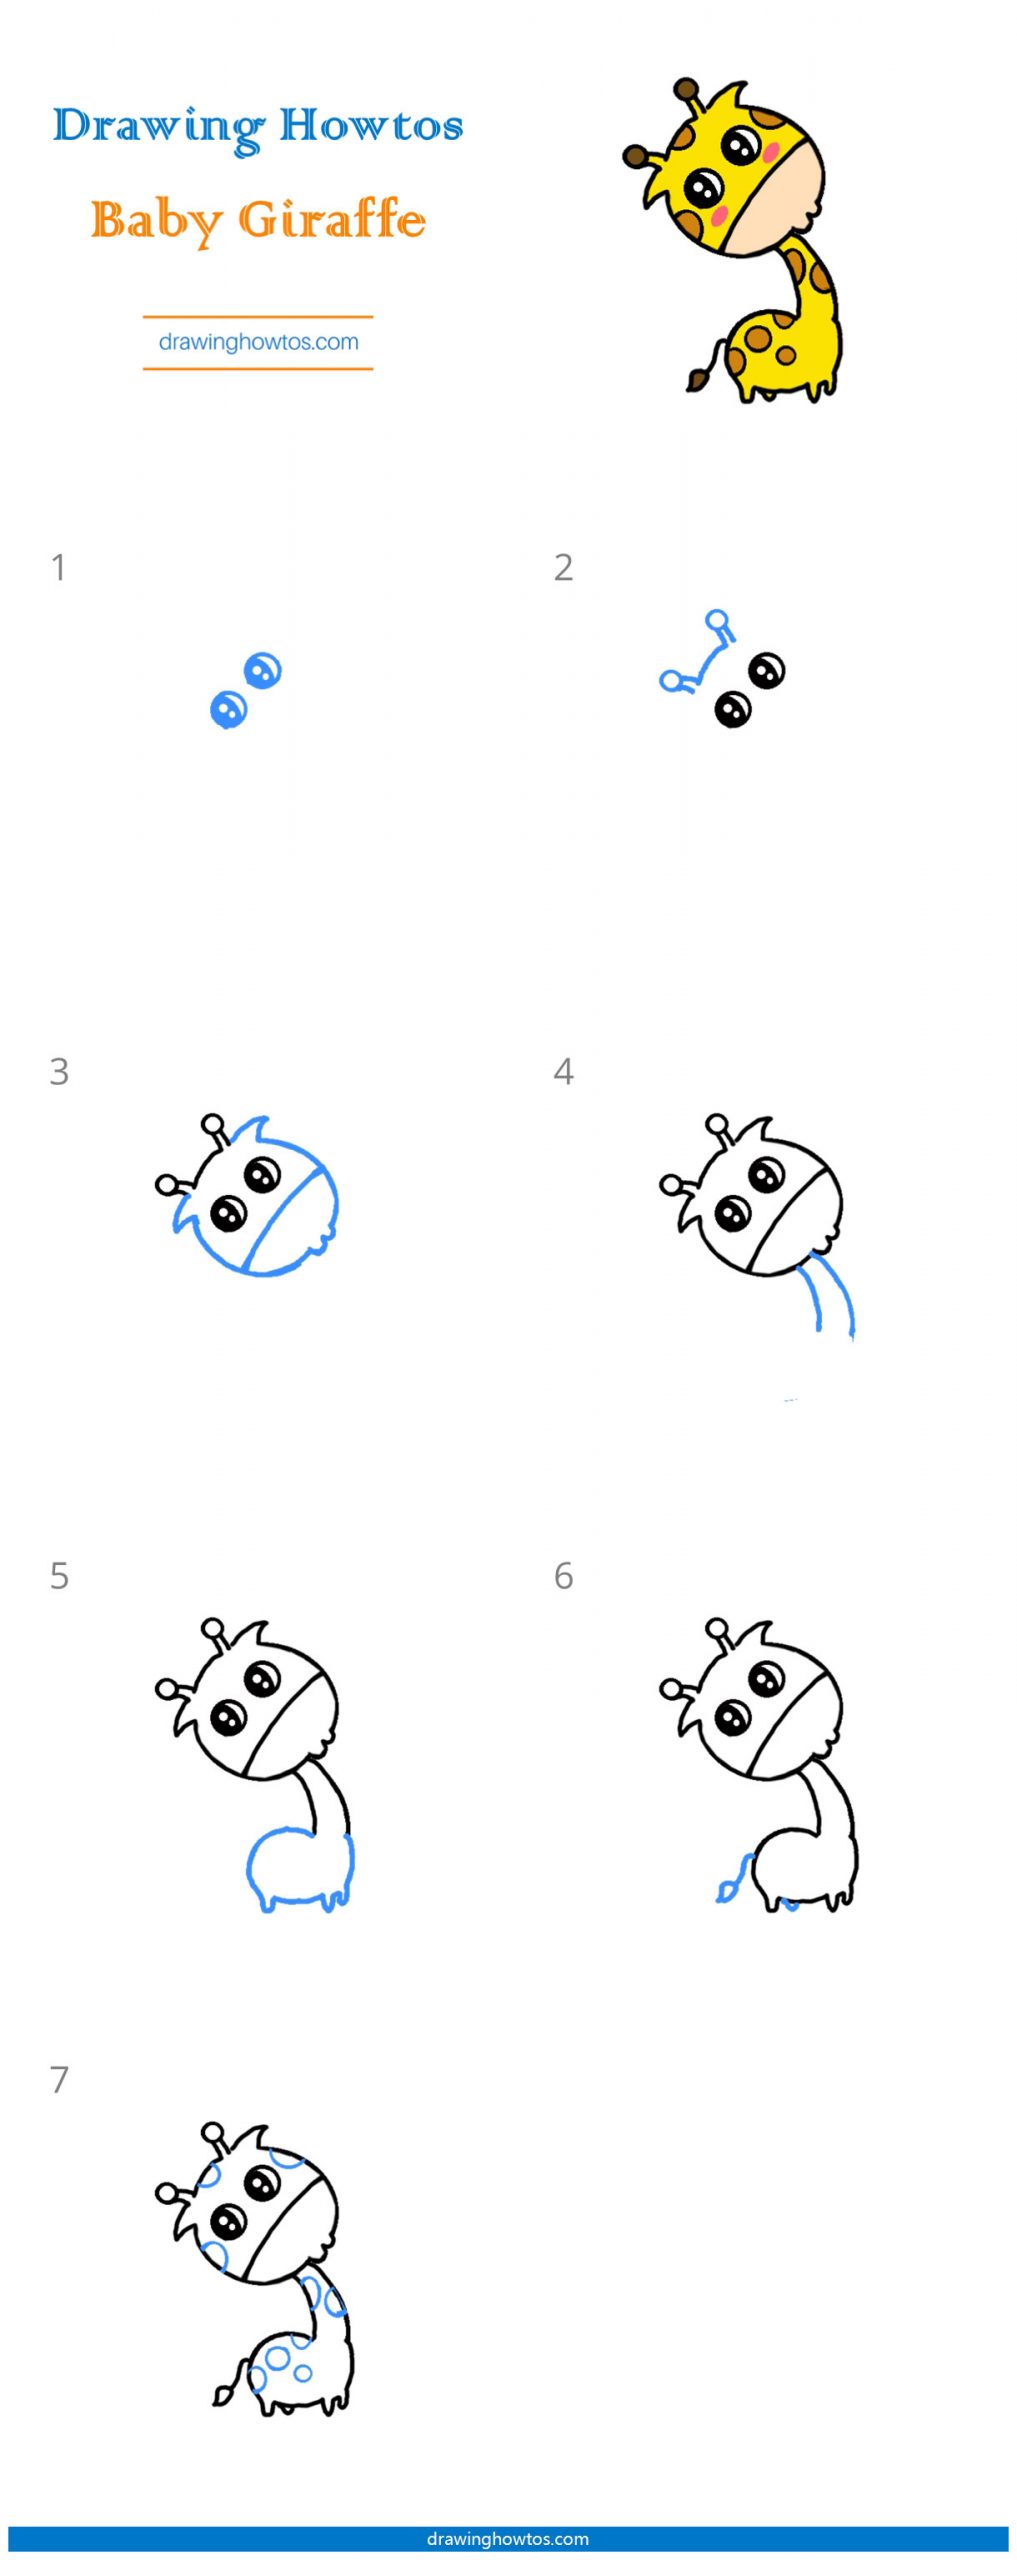 How to Draw a Baby Giraffe Step by Step